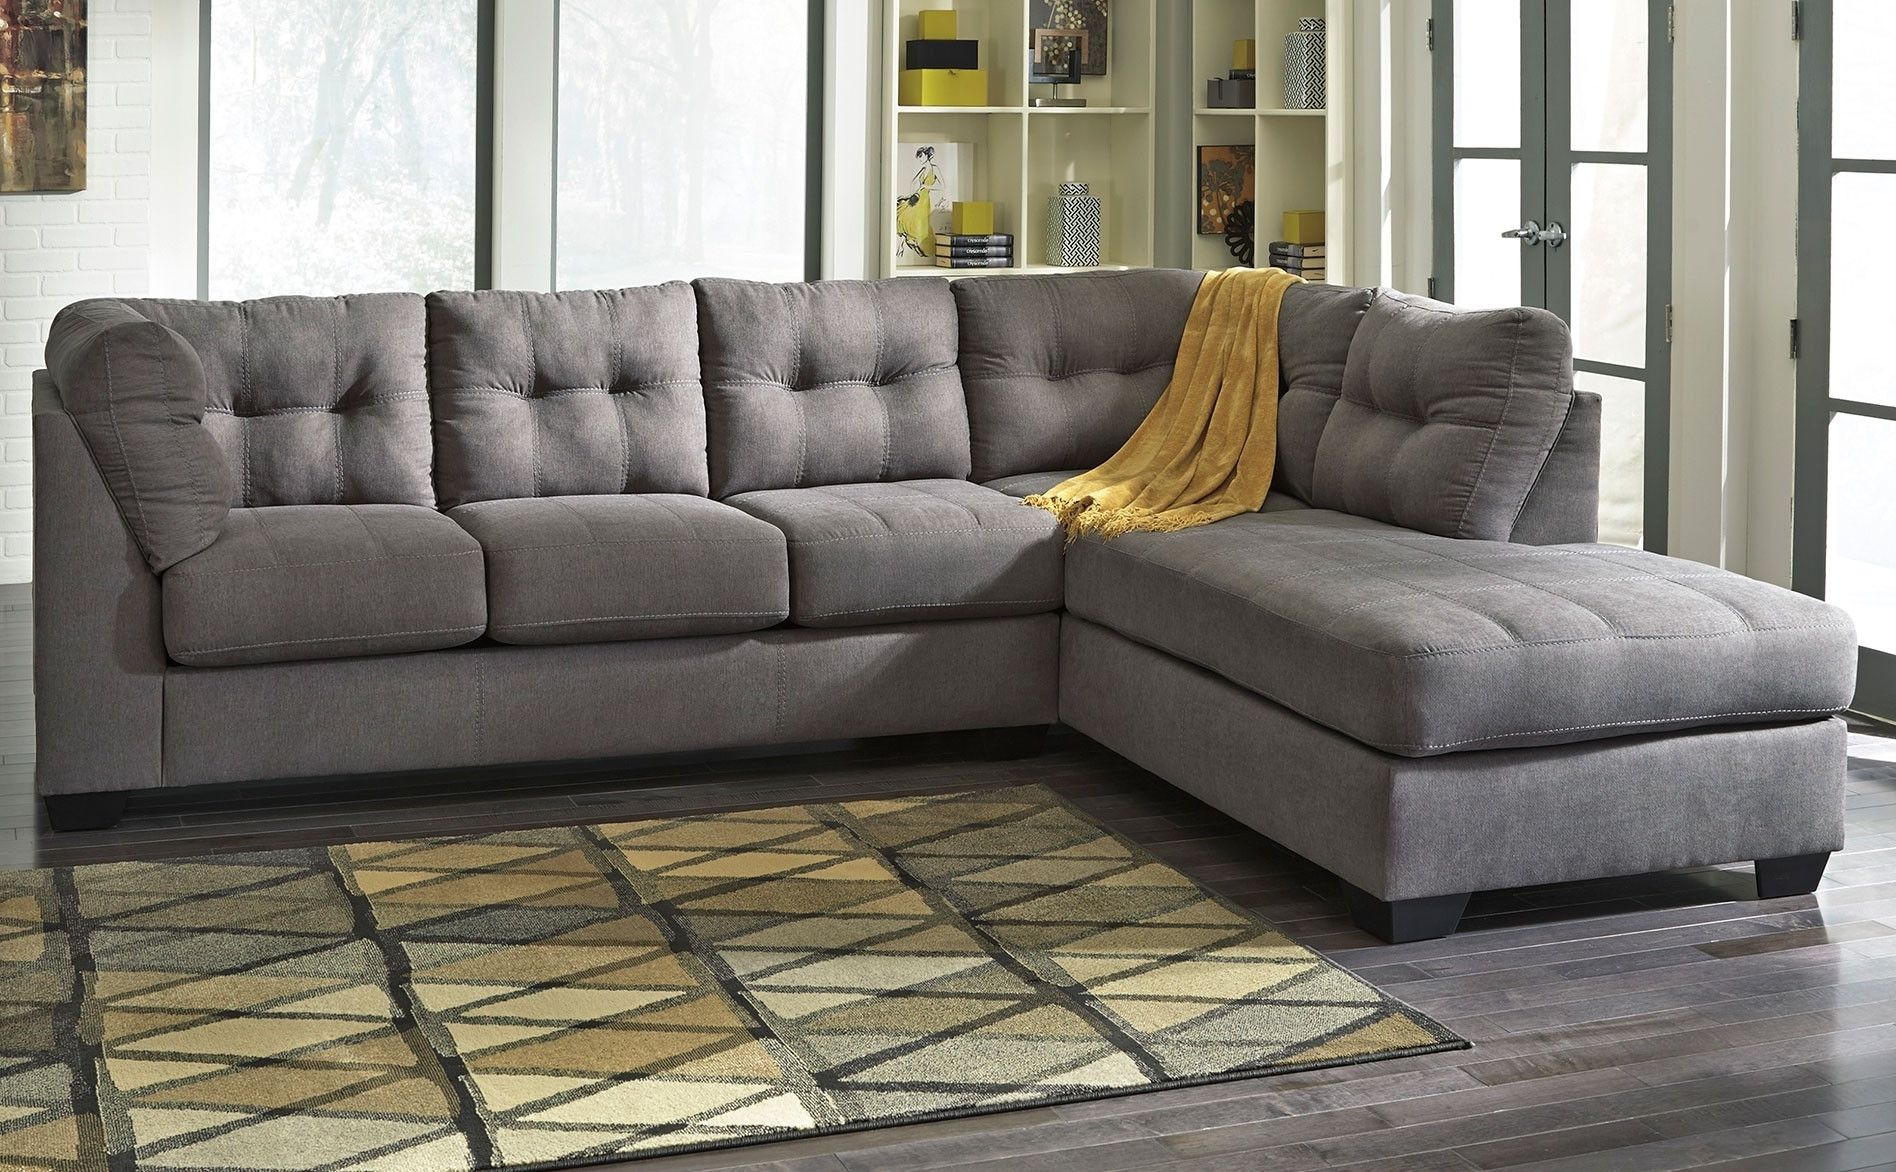 2018 Tufted Sectionals Sofa With Chaise Intended For Sofas: Mesmerizing Macys Sectional Sofa For Best Living Room Decor (View 15 of 15)